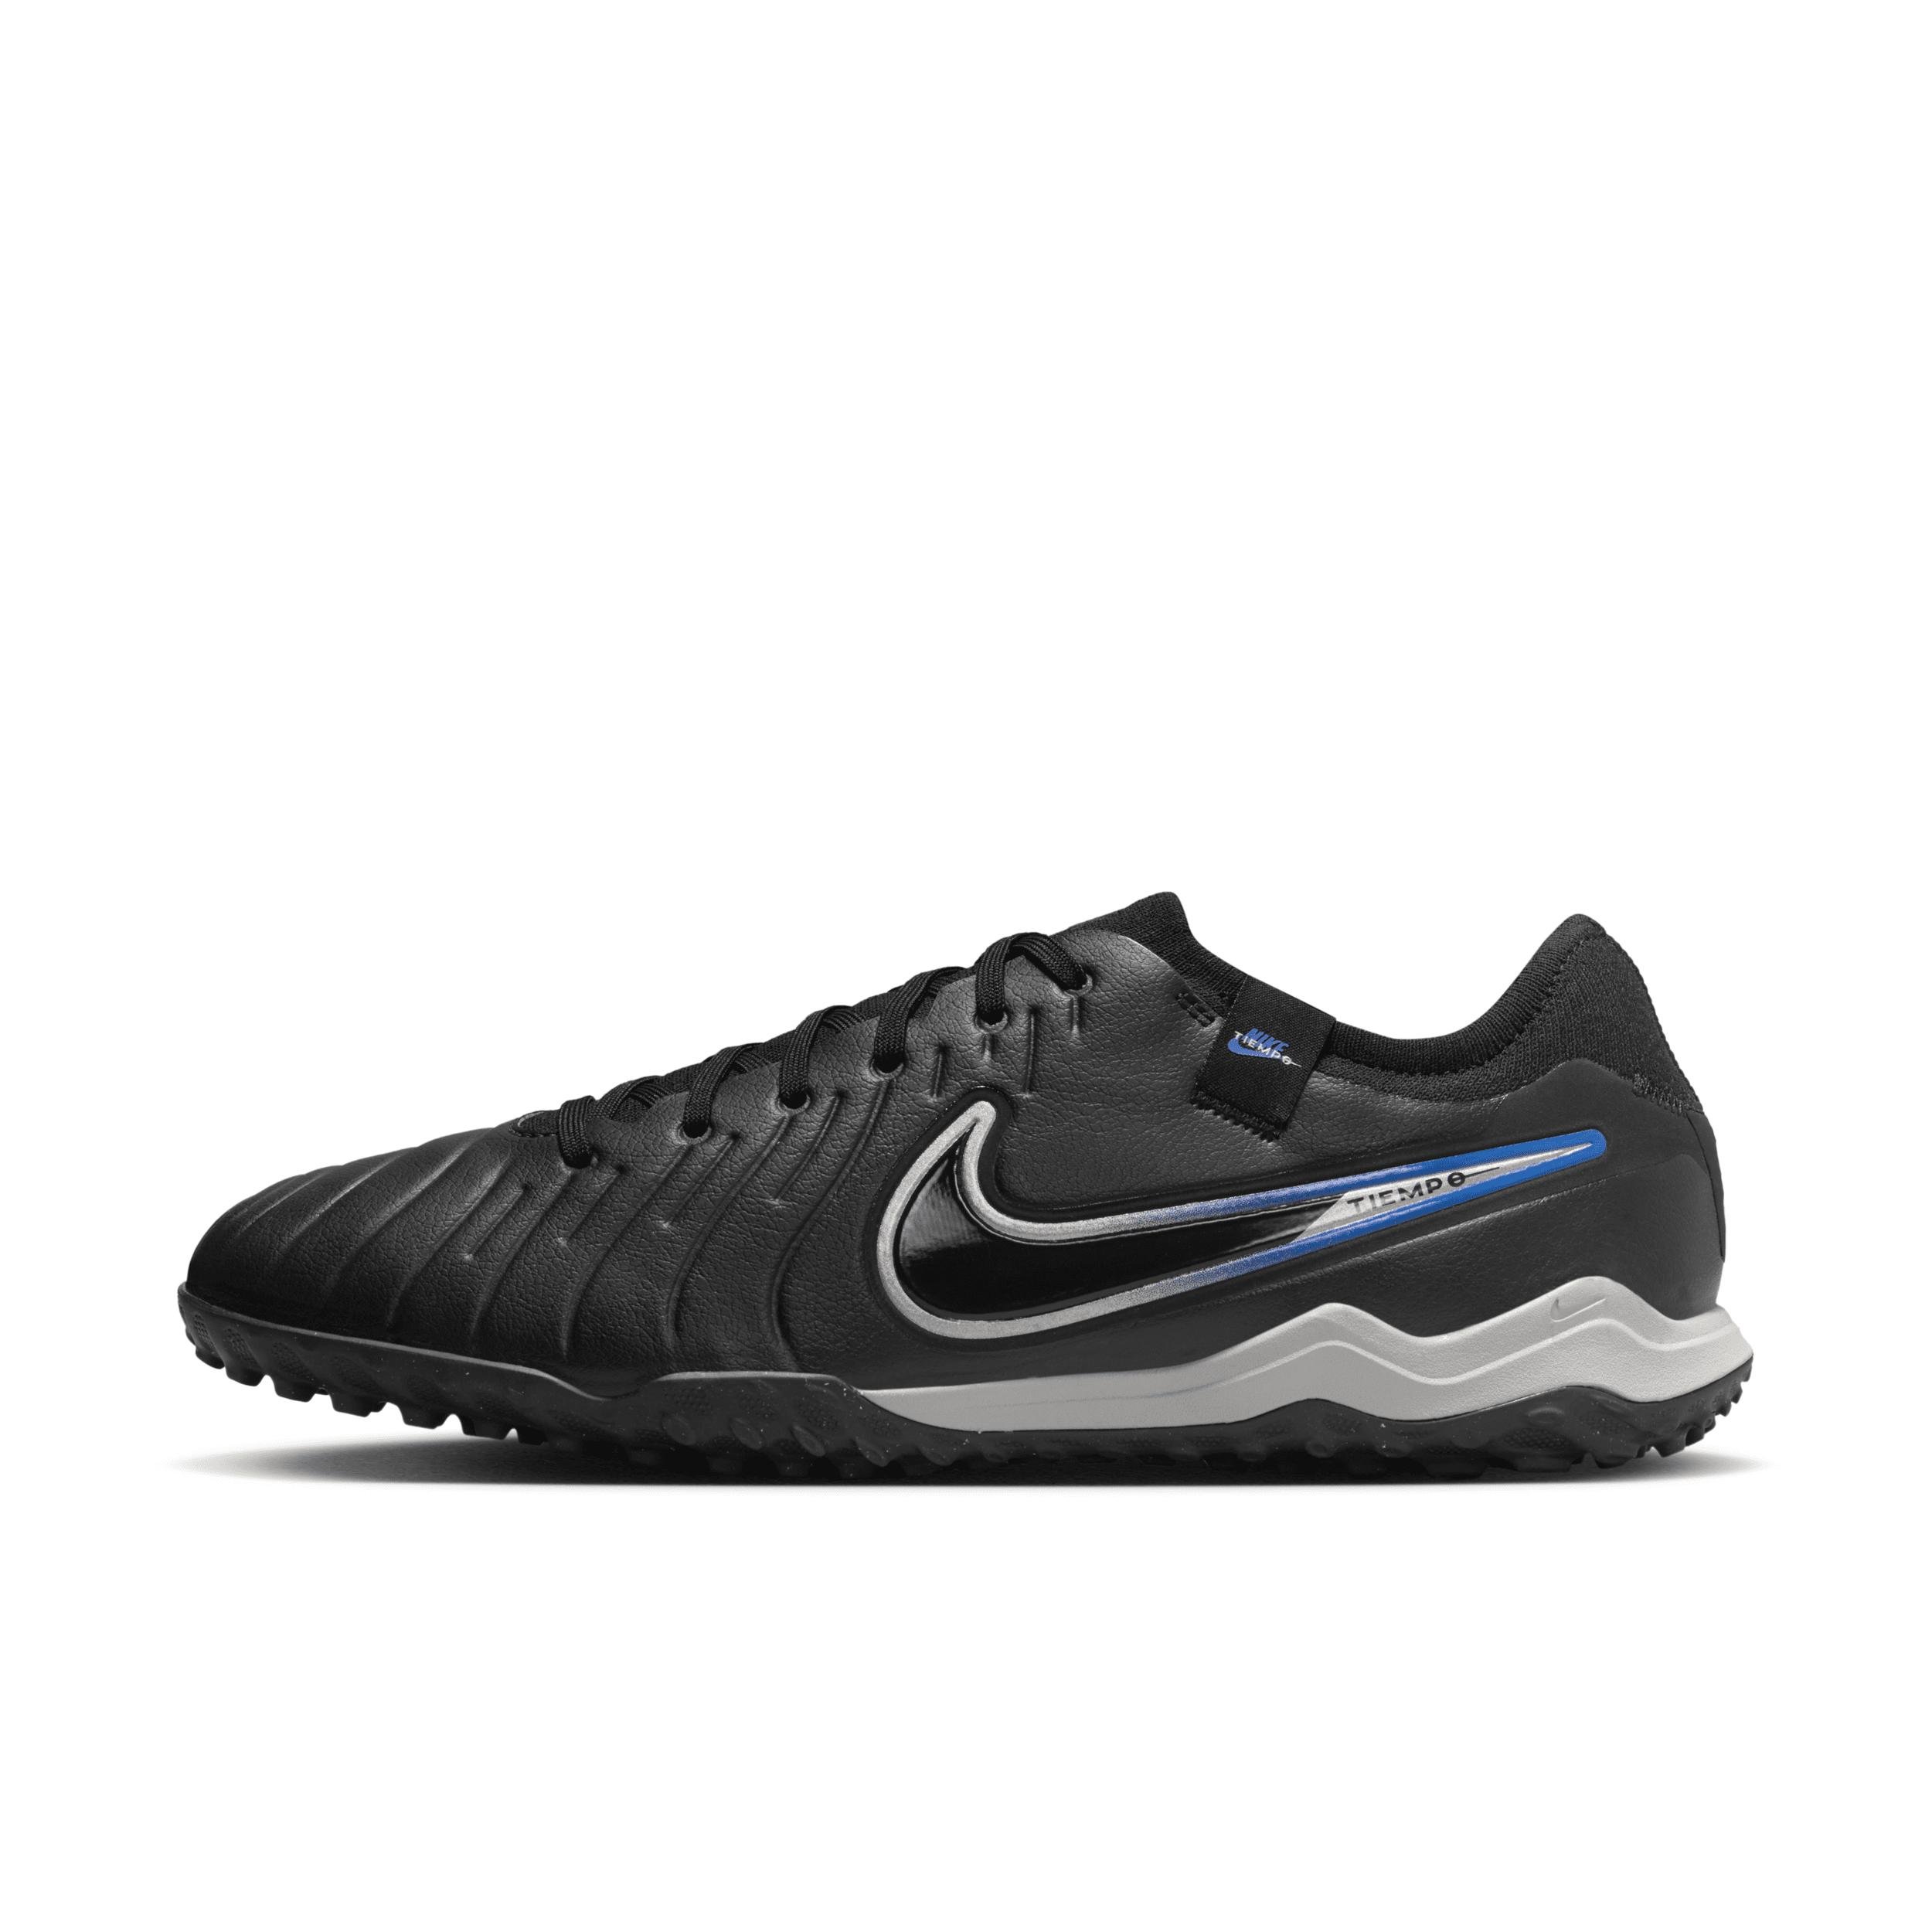 Nike Men's Tiempo Legend 10 Pro Turf Low-Top Soccer Shoes by NIKE